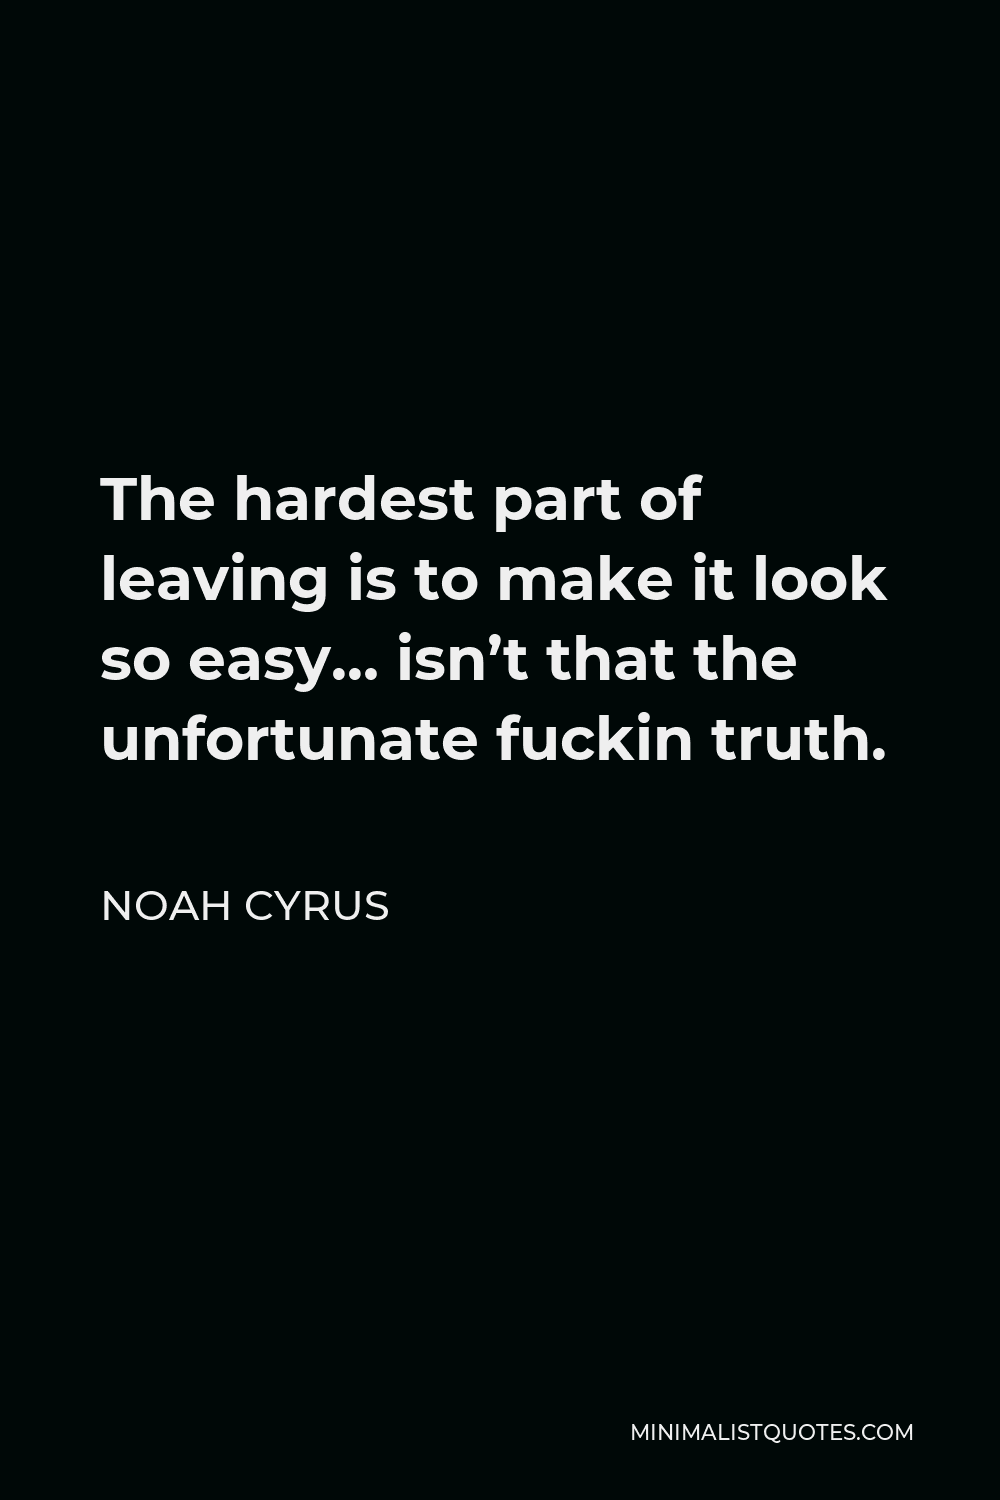 Noah Cyrus Quote - The hardest part of leaving is to make it look so easy… isn’t that the unfortunate fuckin truth.